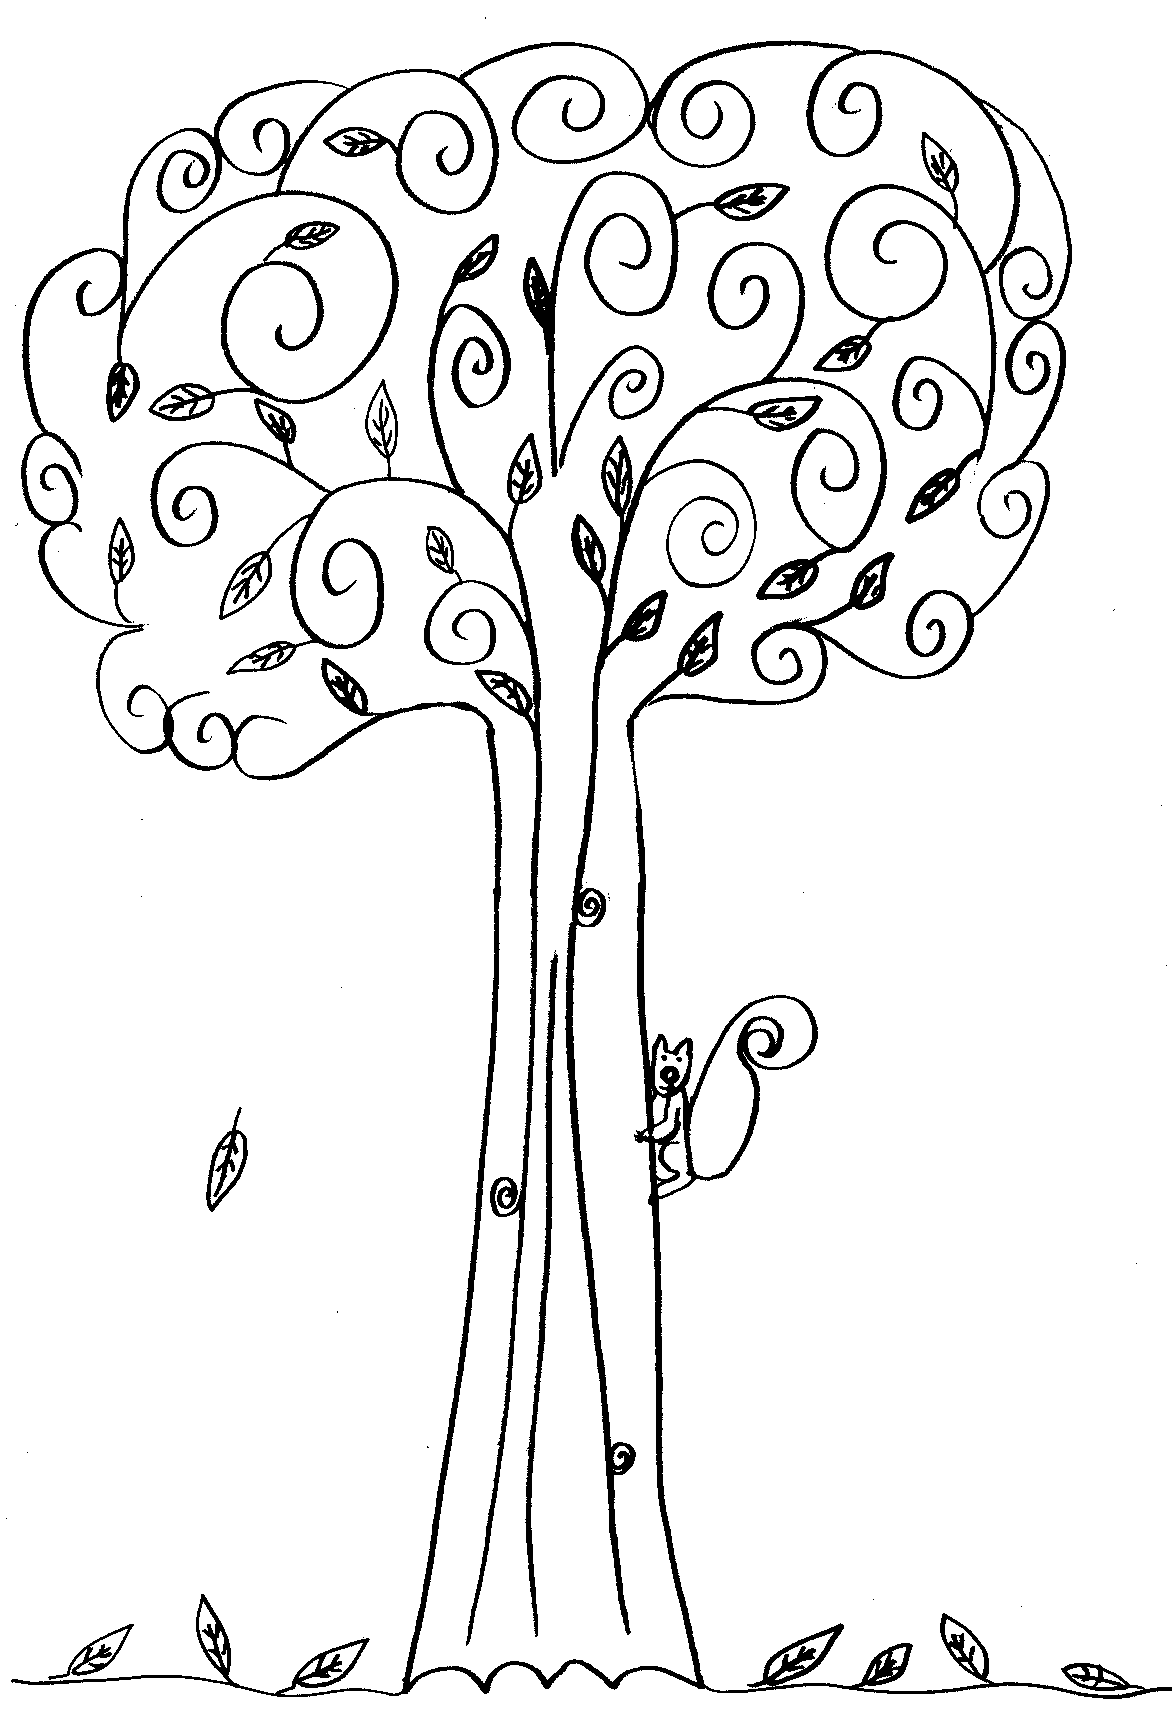 A beautiful tree to put in colors